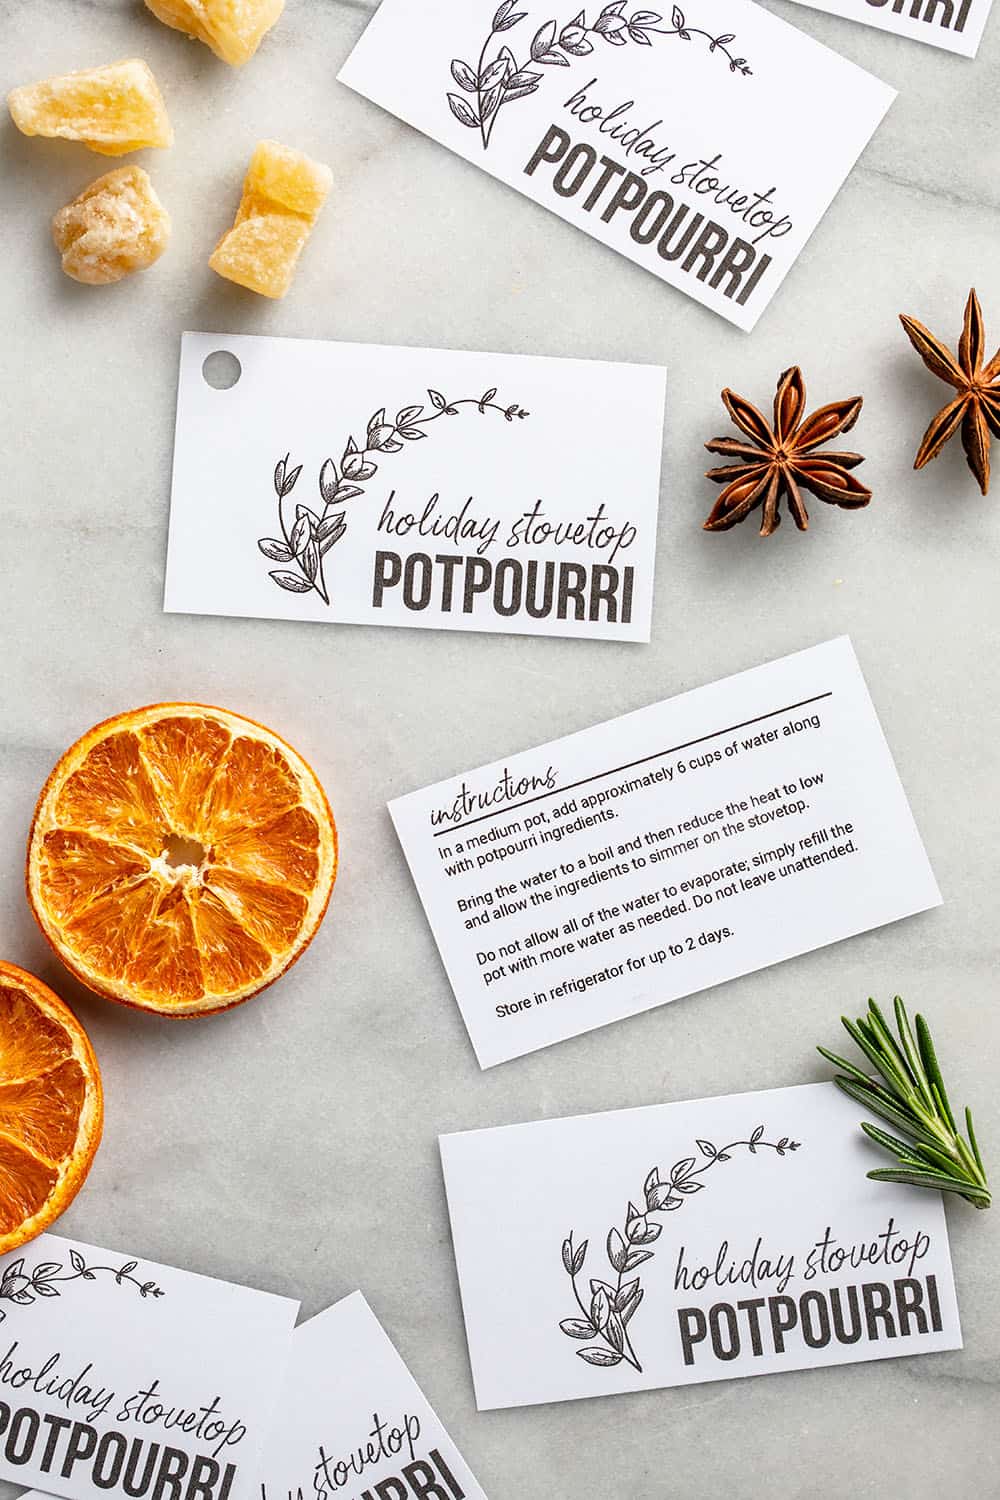 How to Make Orange Spice Stovetop Potpourri for the Holidays